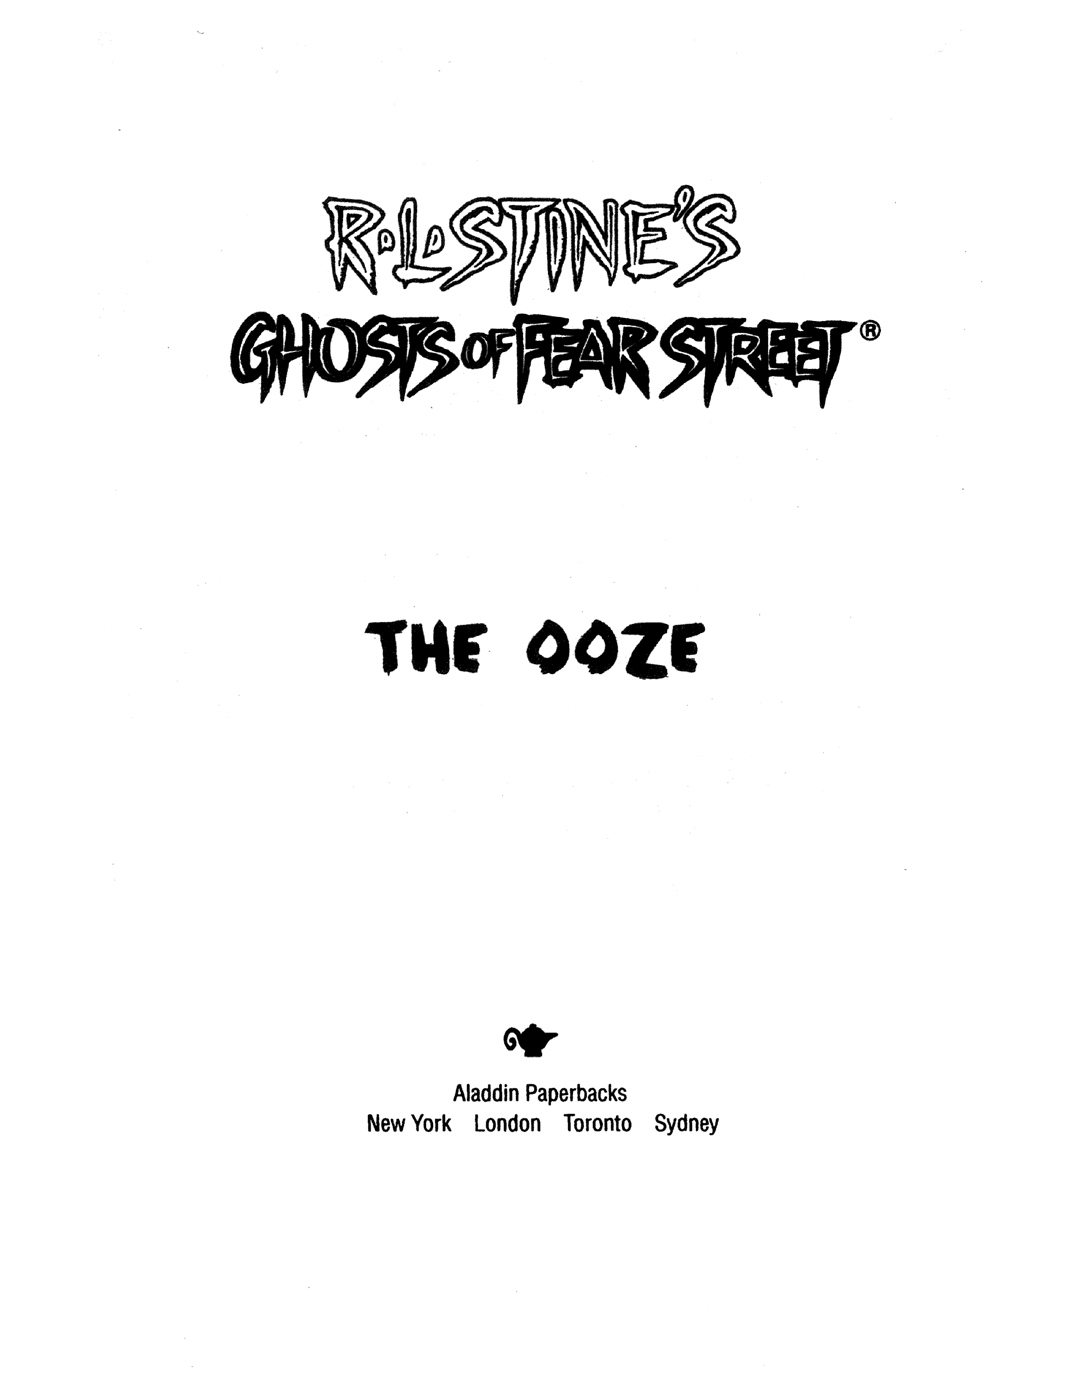 The Ooze by R.L. Stine